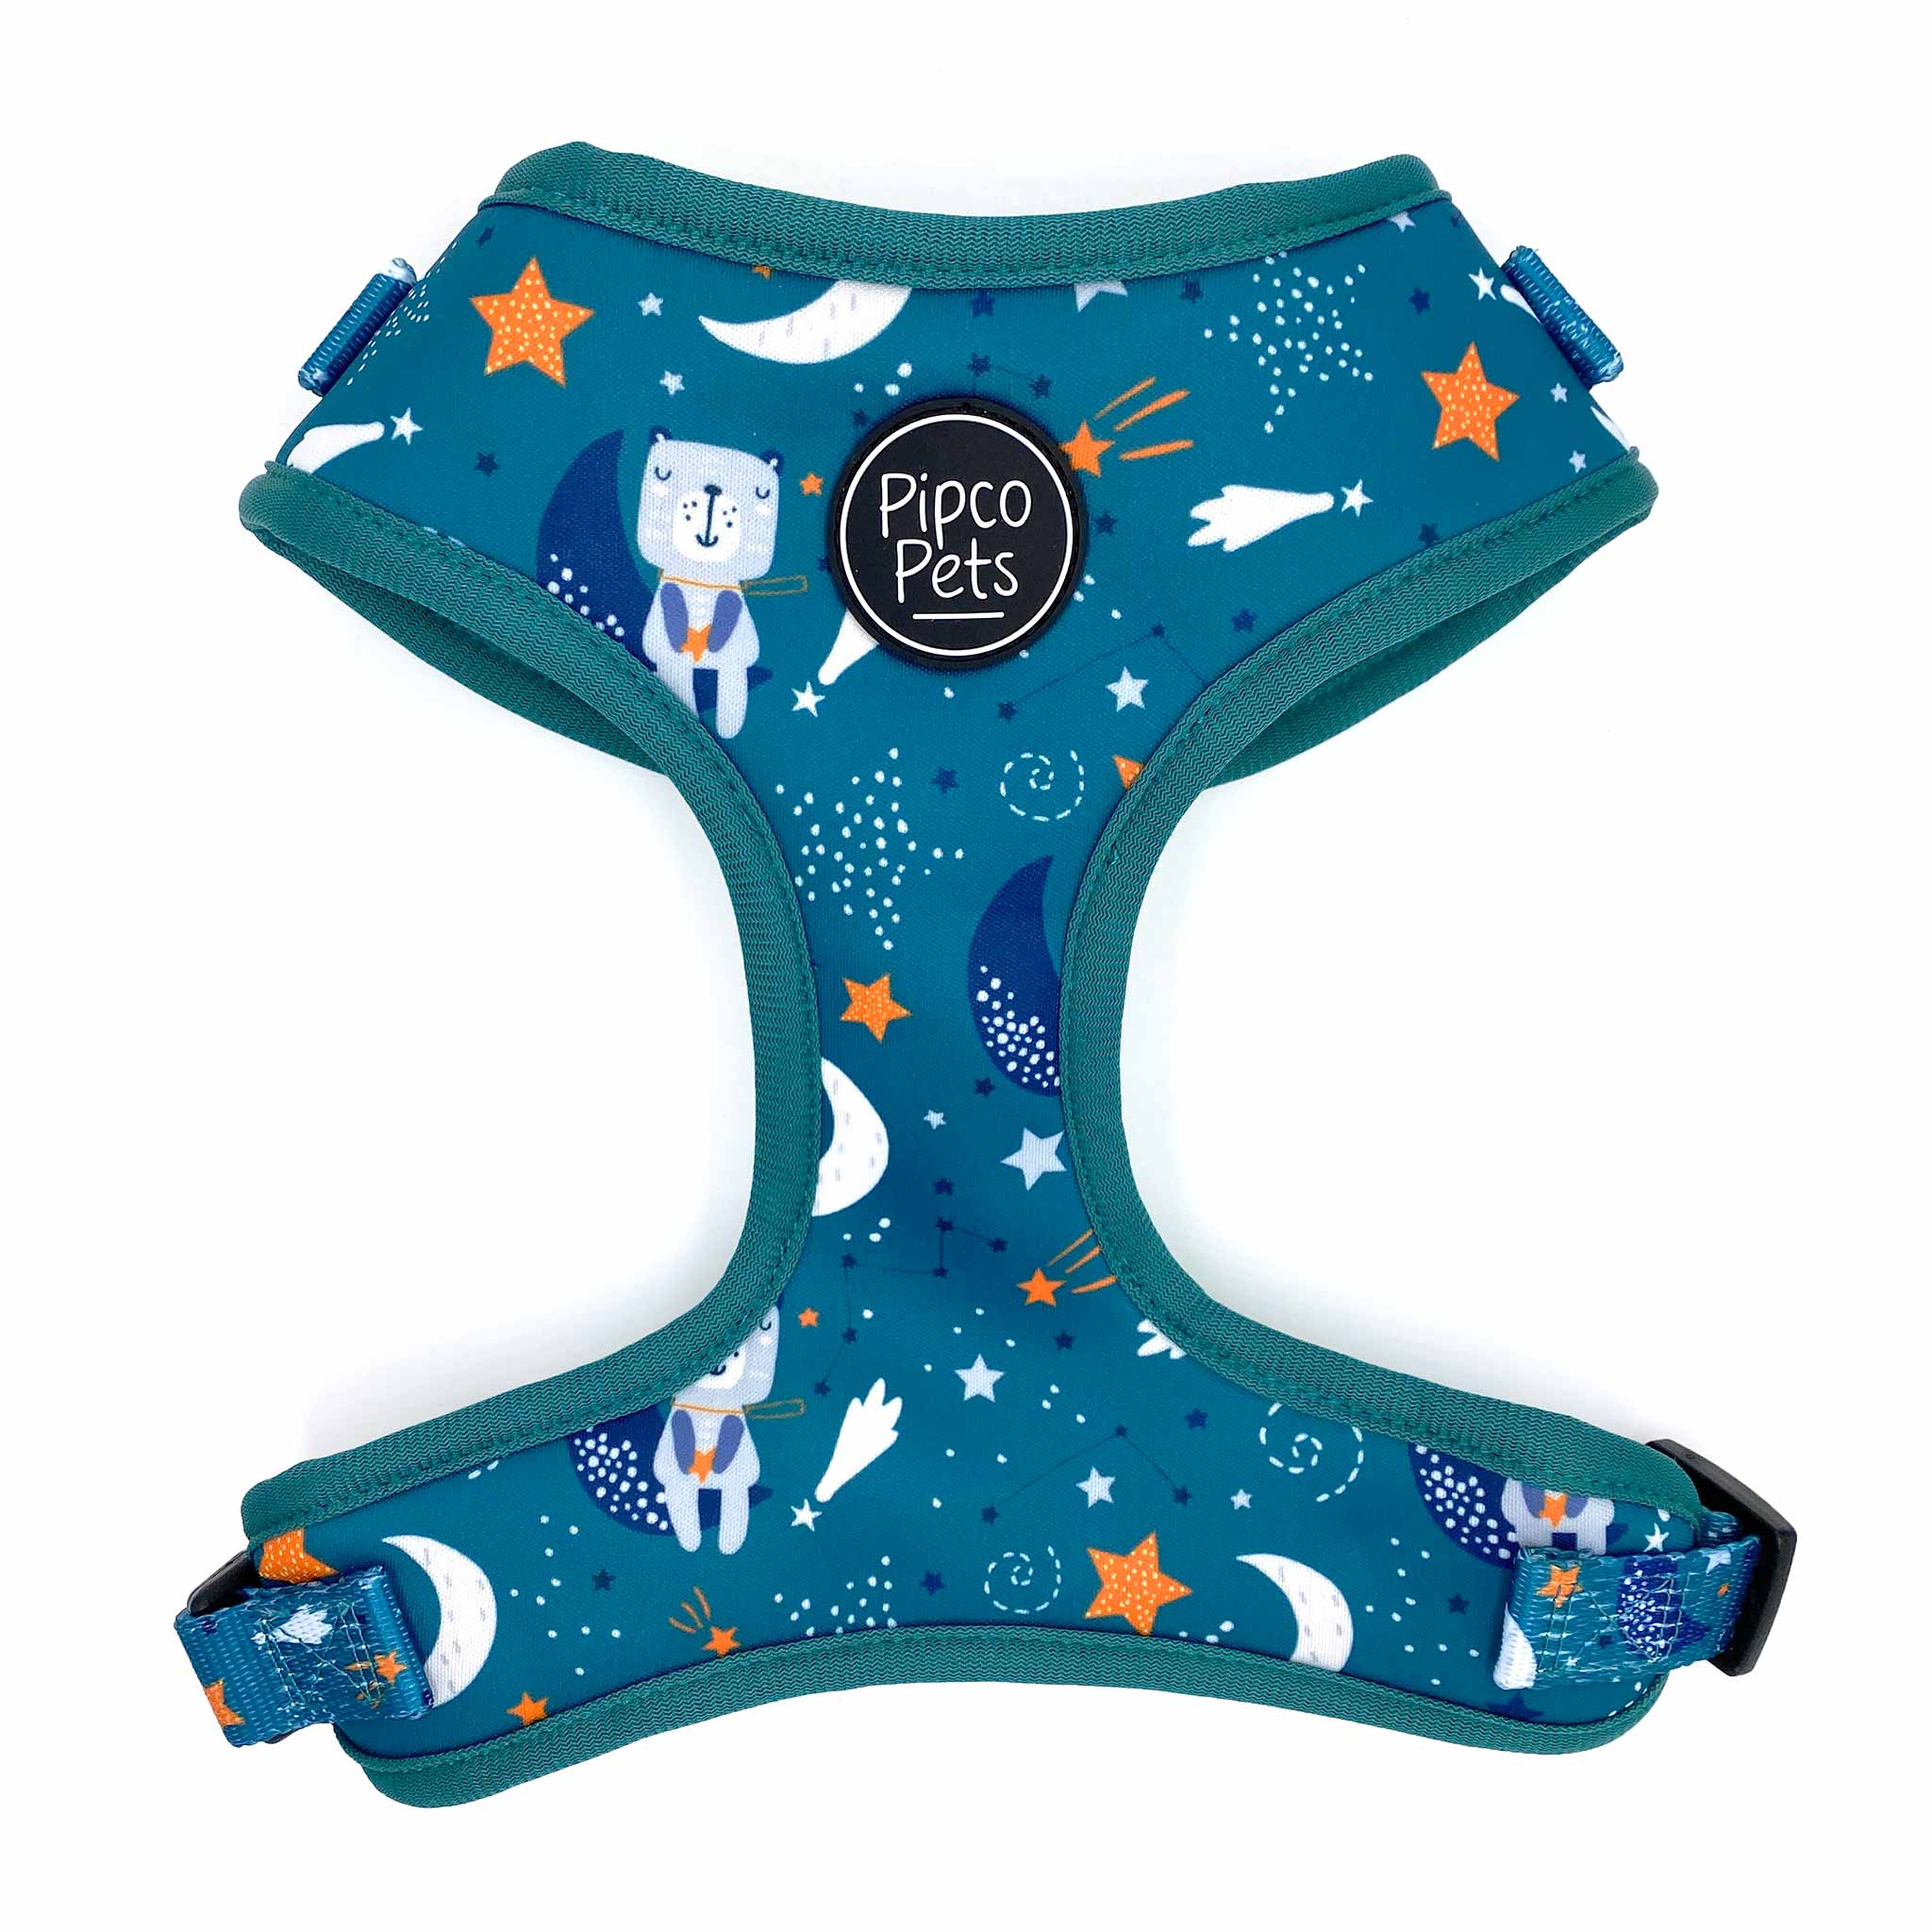 Front view of Pipco Pets adjustable dog harness with Starry Night outer space and stars print pattern in teal  Edit alt text